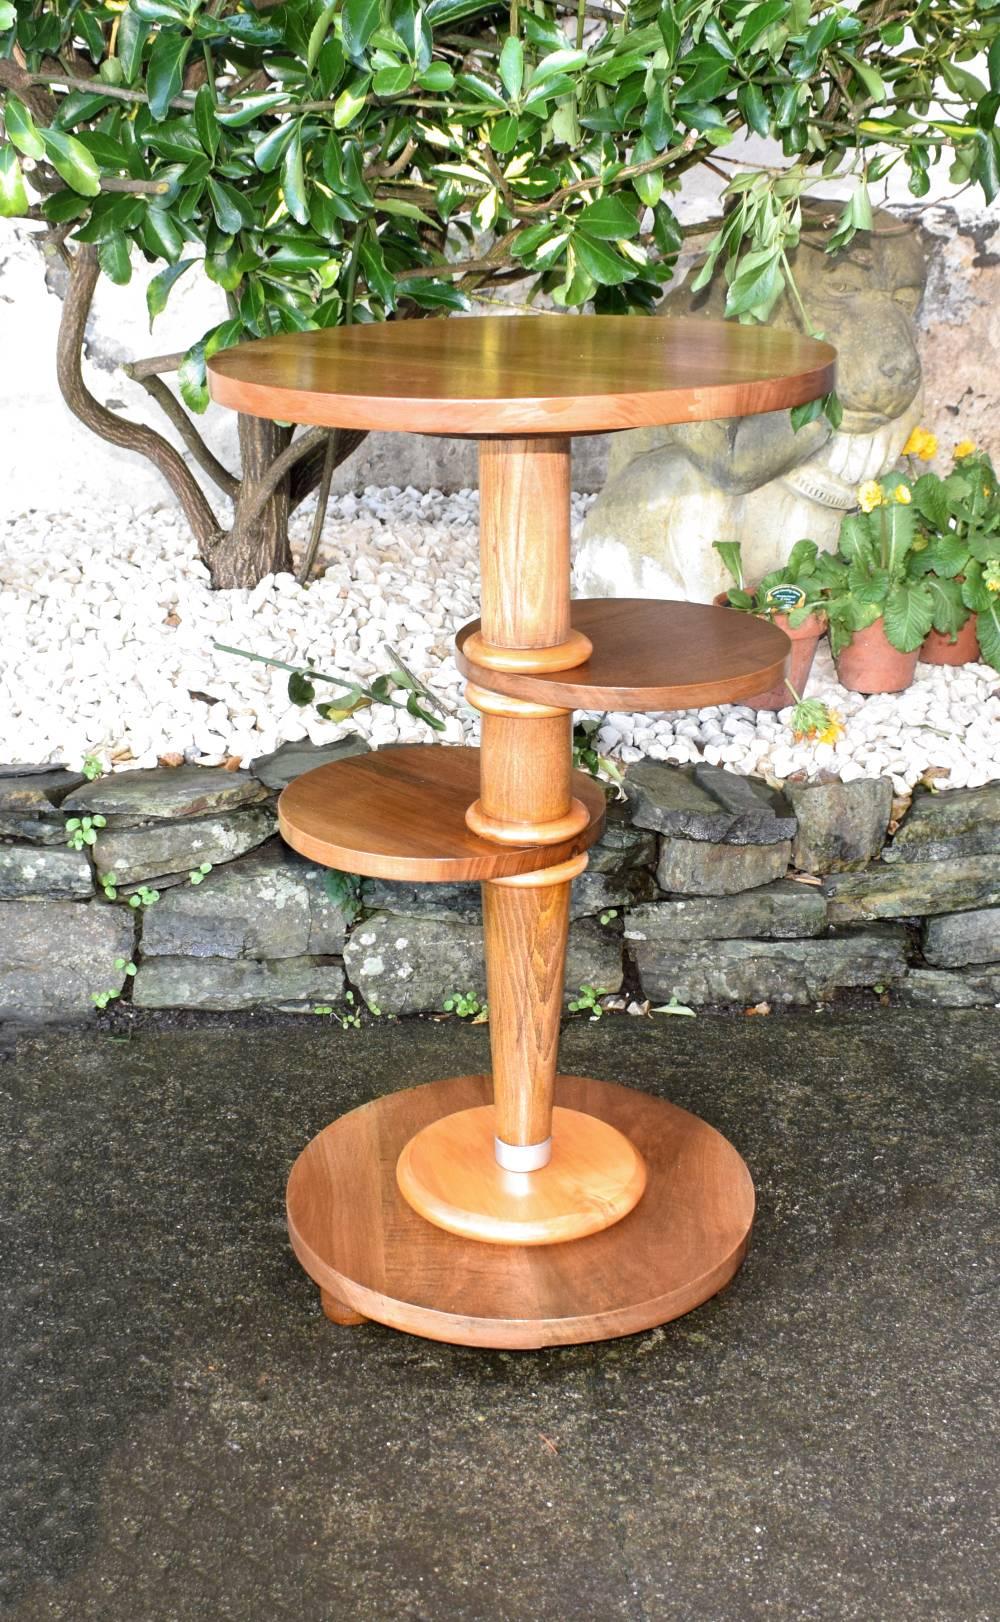 French 1930s Art Deco Gueridon Table In Good Condition For Sale In Devon, England